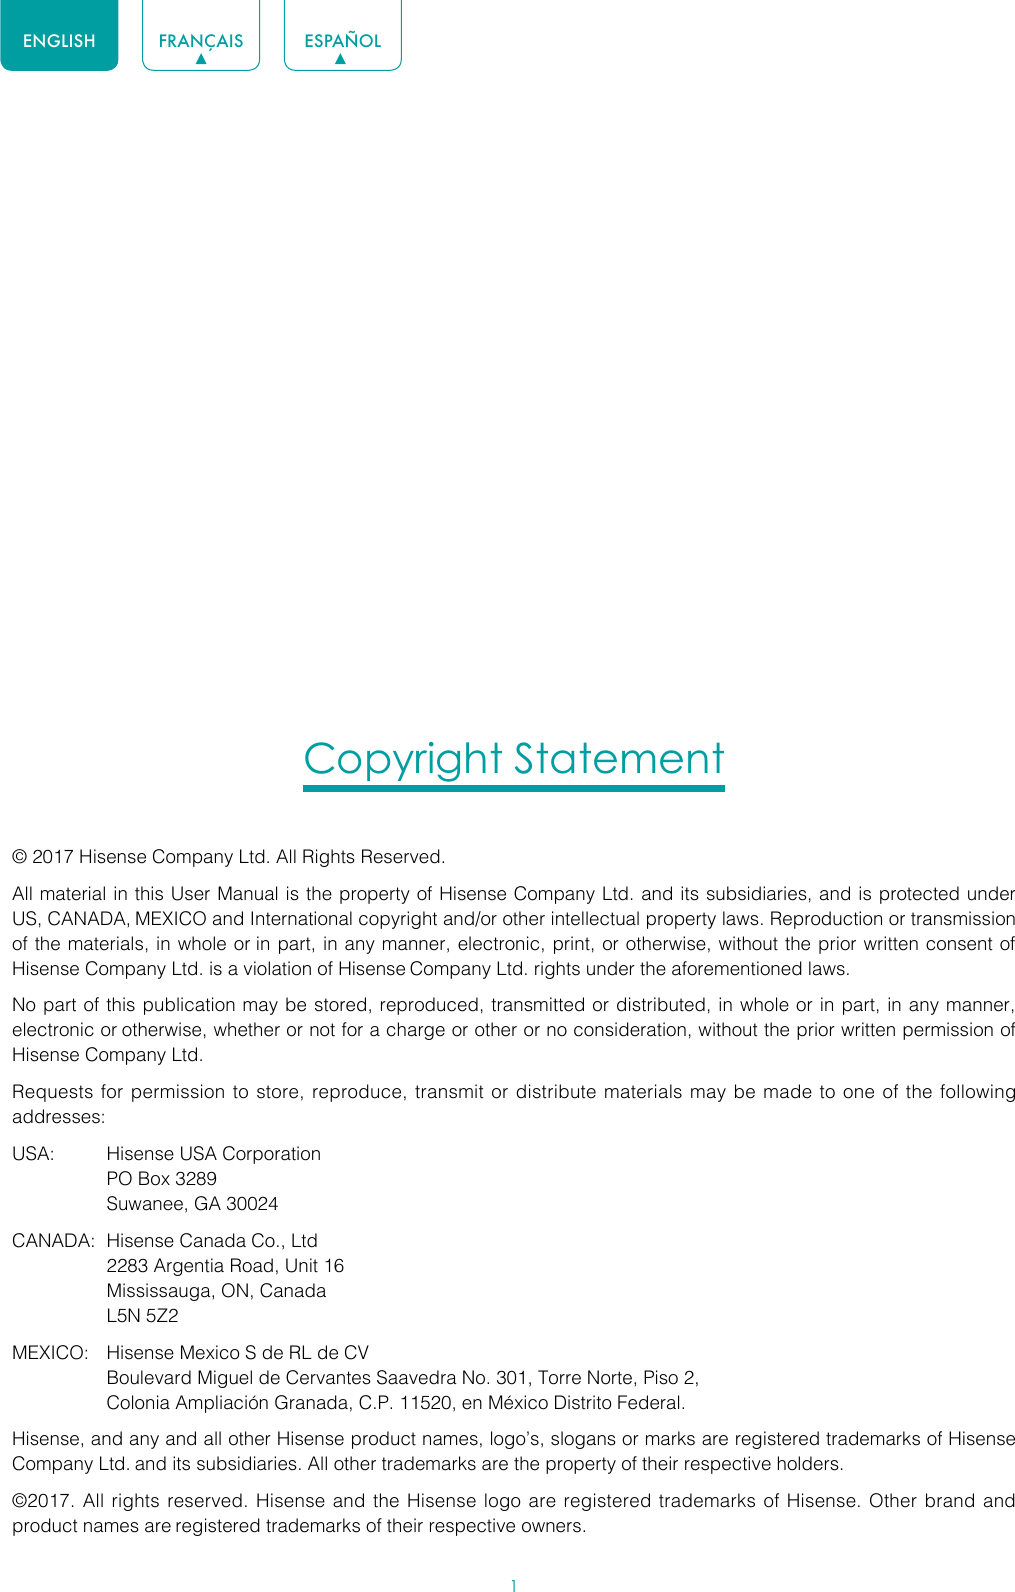 1ENGLISH FRANÇAIS ESPAÑOLCopyright Statement© 2017 Hisense Company Ltd. All Rights Reserved.All material in this User Manual is the property of Hisense Company Ltd. and its subsidiaries, and is protected under US, CANADA, MEXICO and International copyright and/or other intellectual property laws. Reproduction or transmission of the materials, in whole or in part, in any manner, electronic, print, or otherwise, without the prior written consent of Hisense Company Ltd. is a violation of Hisense Company Ltd. rights under the aforementioned laws.No part of this publication may be stored, reproduced, transmitted or distributed, in whole or in part, in any manner, electronic or otherwise, whether or not for a charge or other or no consideration, without the prior written permission of Hisense Company Ltd.Requests for permission to store, reproduce, transmit or distribute materials may be made to one of the following addresses:USA:  Hisense USA Corporation  PO Box 3289  Suwanee, GA 30024CANADA:  Hisense Canada Co., Ltd  2283 Argentia Road, Unit 16  Mississauga, ON, Canada  L5N 5Z2MEXICO:  Hisense Mexico S de RL de CV  Boulevard Miguel de Cervantes Saavedra No. 301, Torre Norte, Piso 2,  Colonia Ampliación Granada, C.P. 11520, en México Distrito Federal.Hisense, and any and all other Hisense product names, logo’s, slogans or marks are registered trademarks of Hisense Company Ltd. and its subsidiaries. All other trademarks are the property of their respective holders.©2017. All rights reserved. Hisense and the Hisense logo are registered trademarks of Hisense. Other brand and product names are registered trademarks of their respective owners.